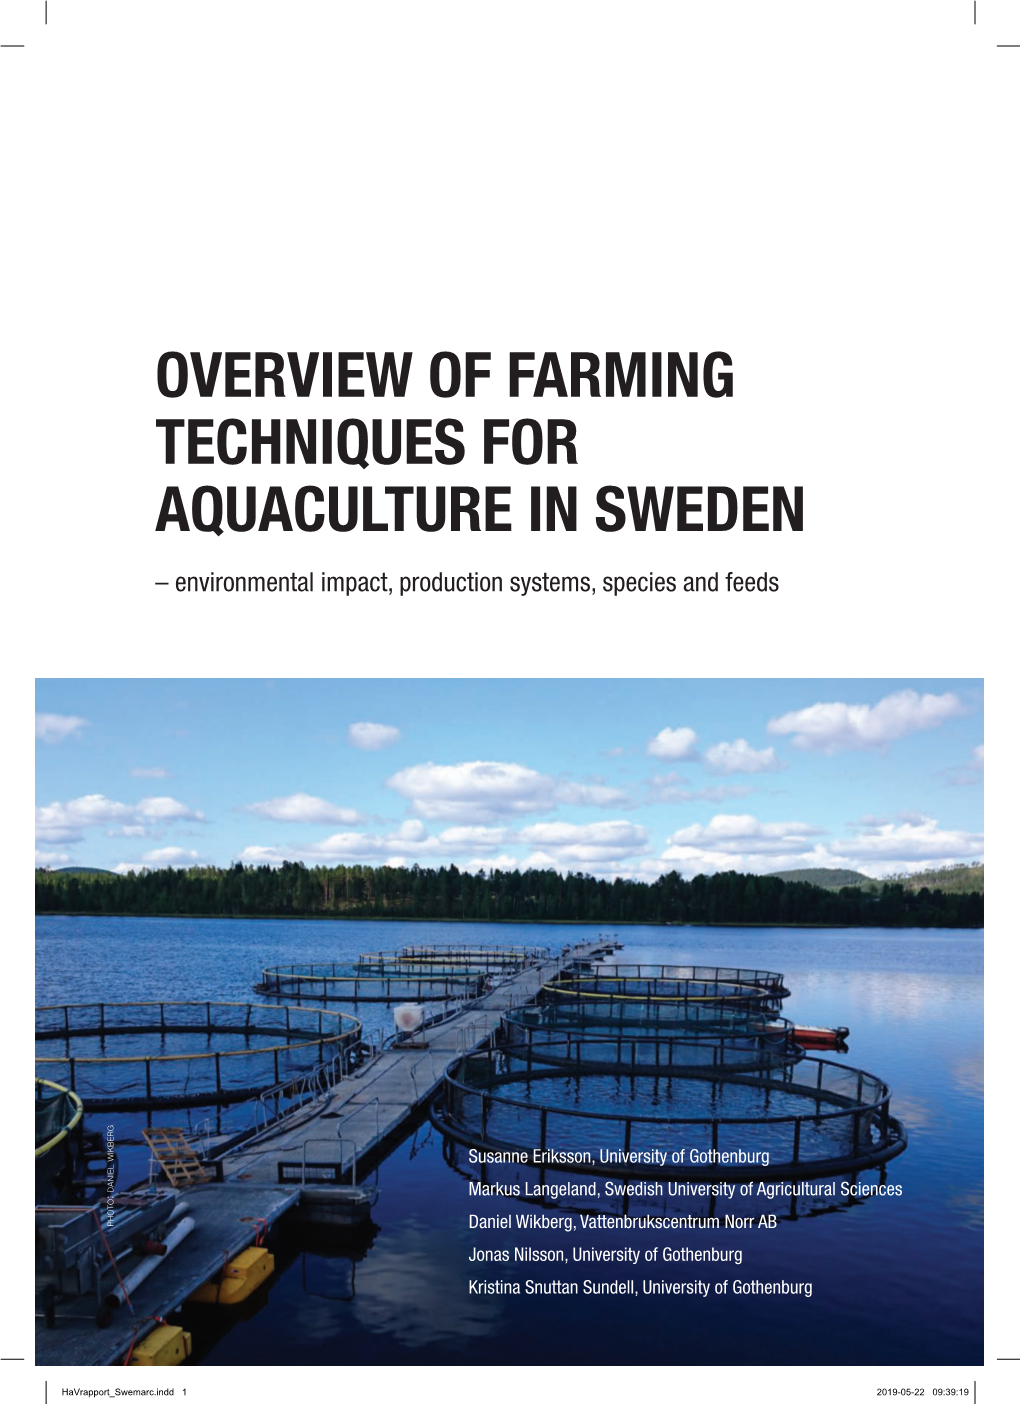 OVERVIEW of FARMING TECHNIQUES for AQUACULTURE in SWEDEN – Environmental Impact, Production Systems, Species and Feeds WIKBERG